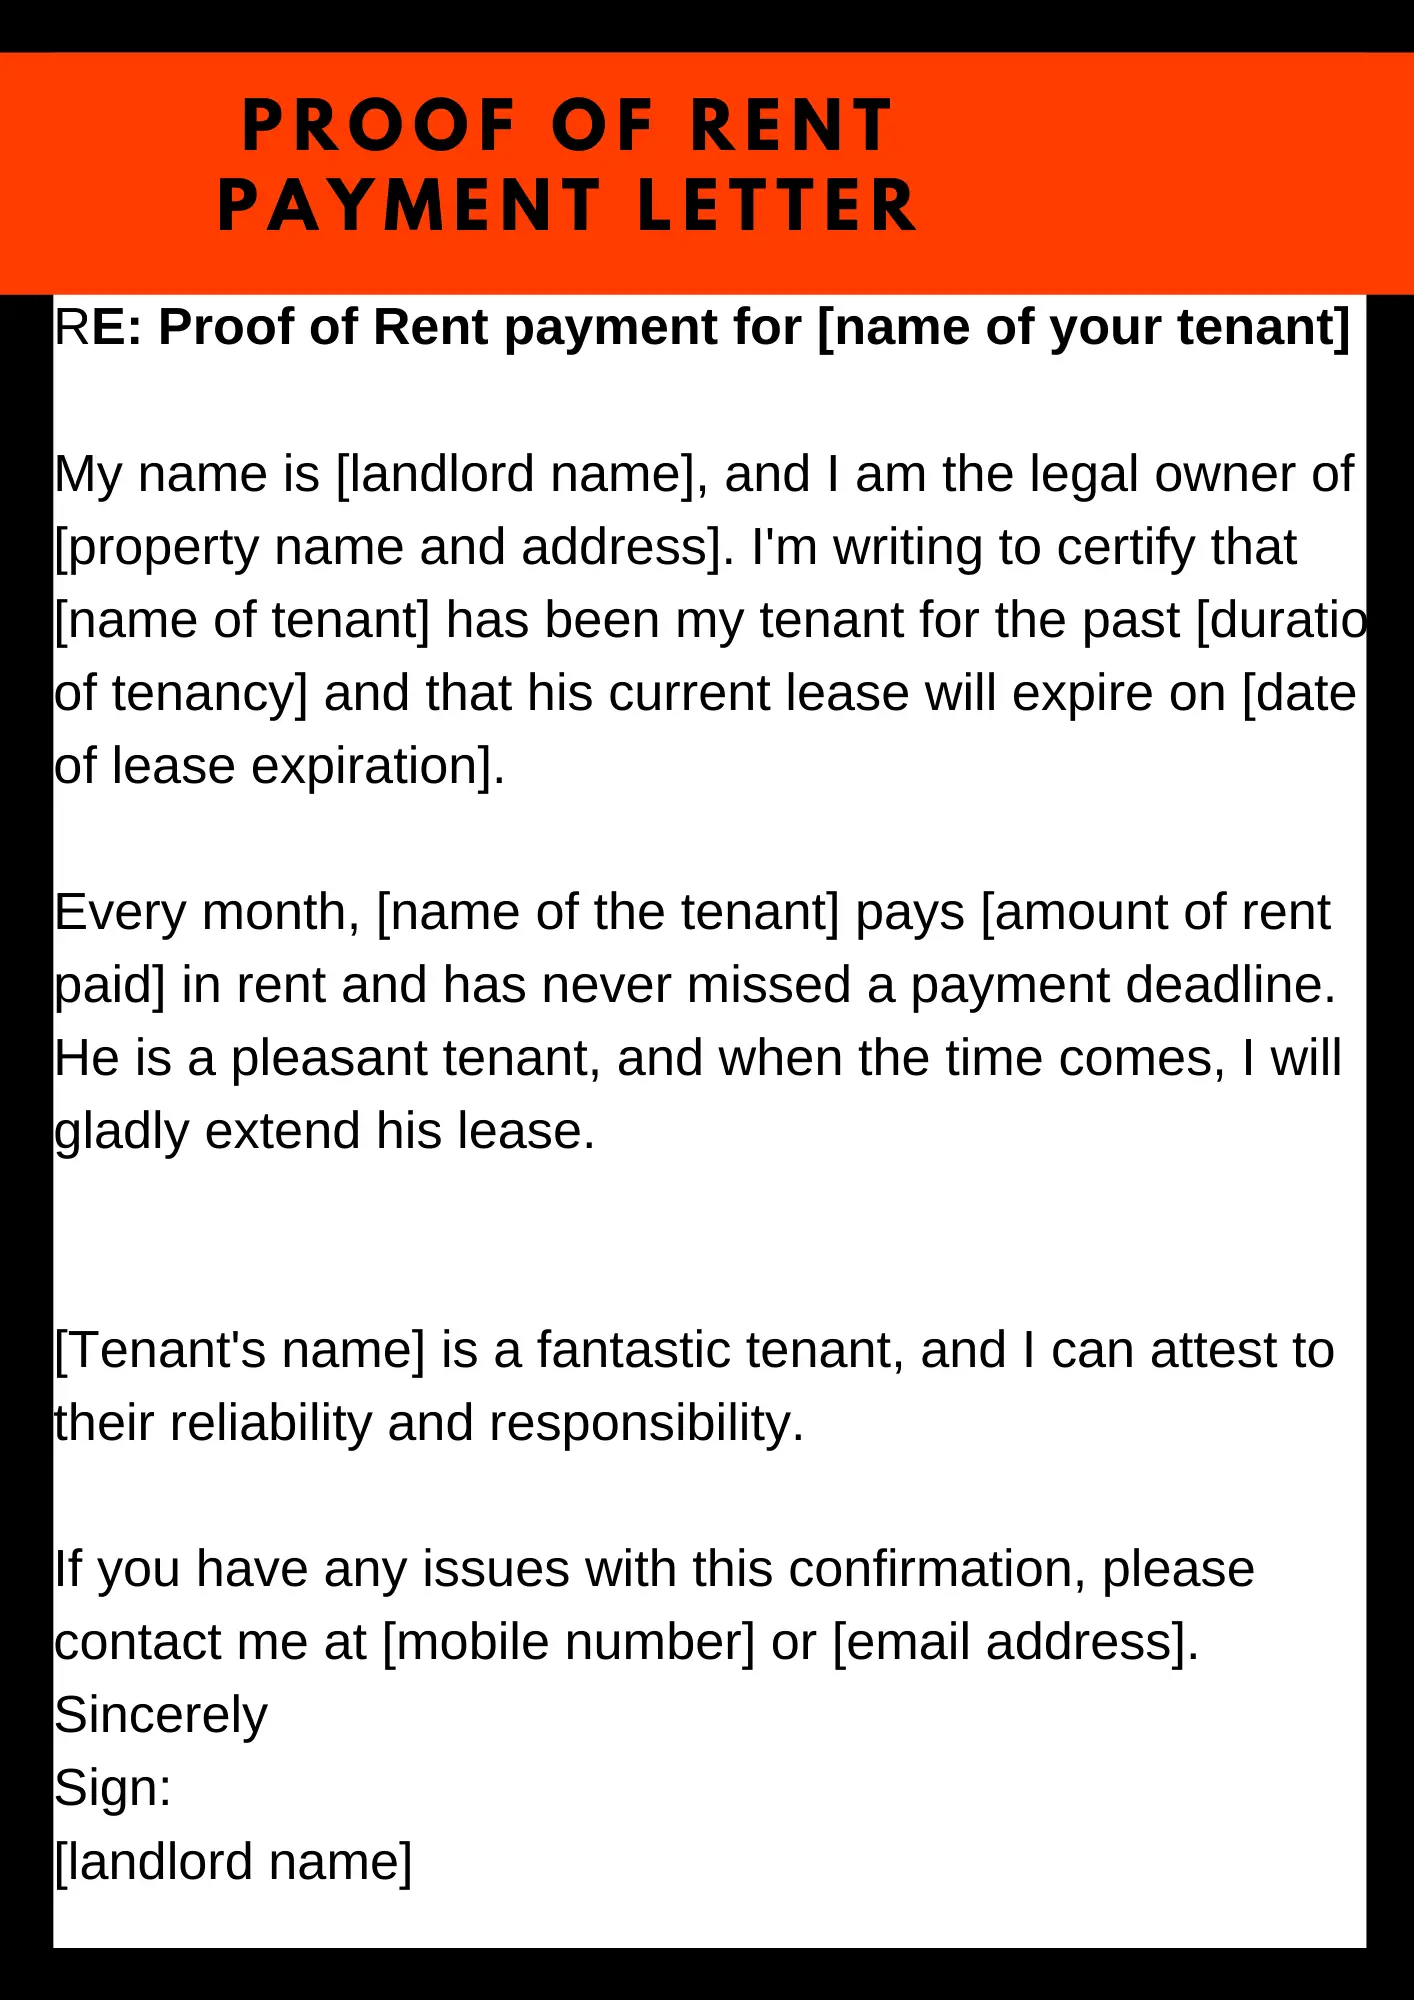 proof of rent payment letter sample, proof of rent payment letter template